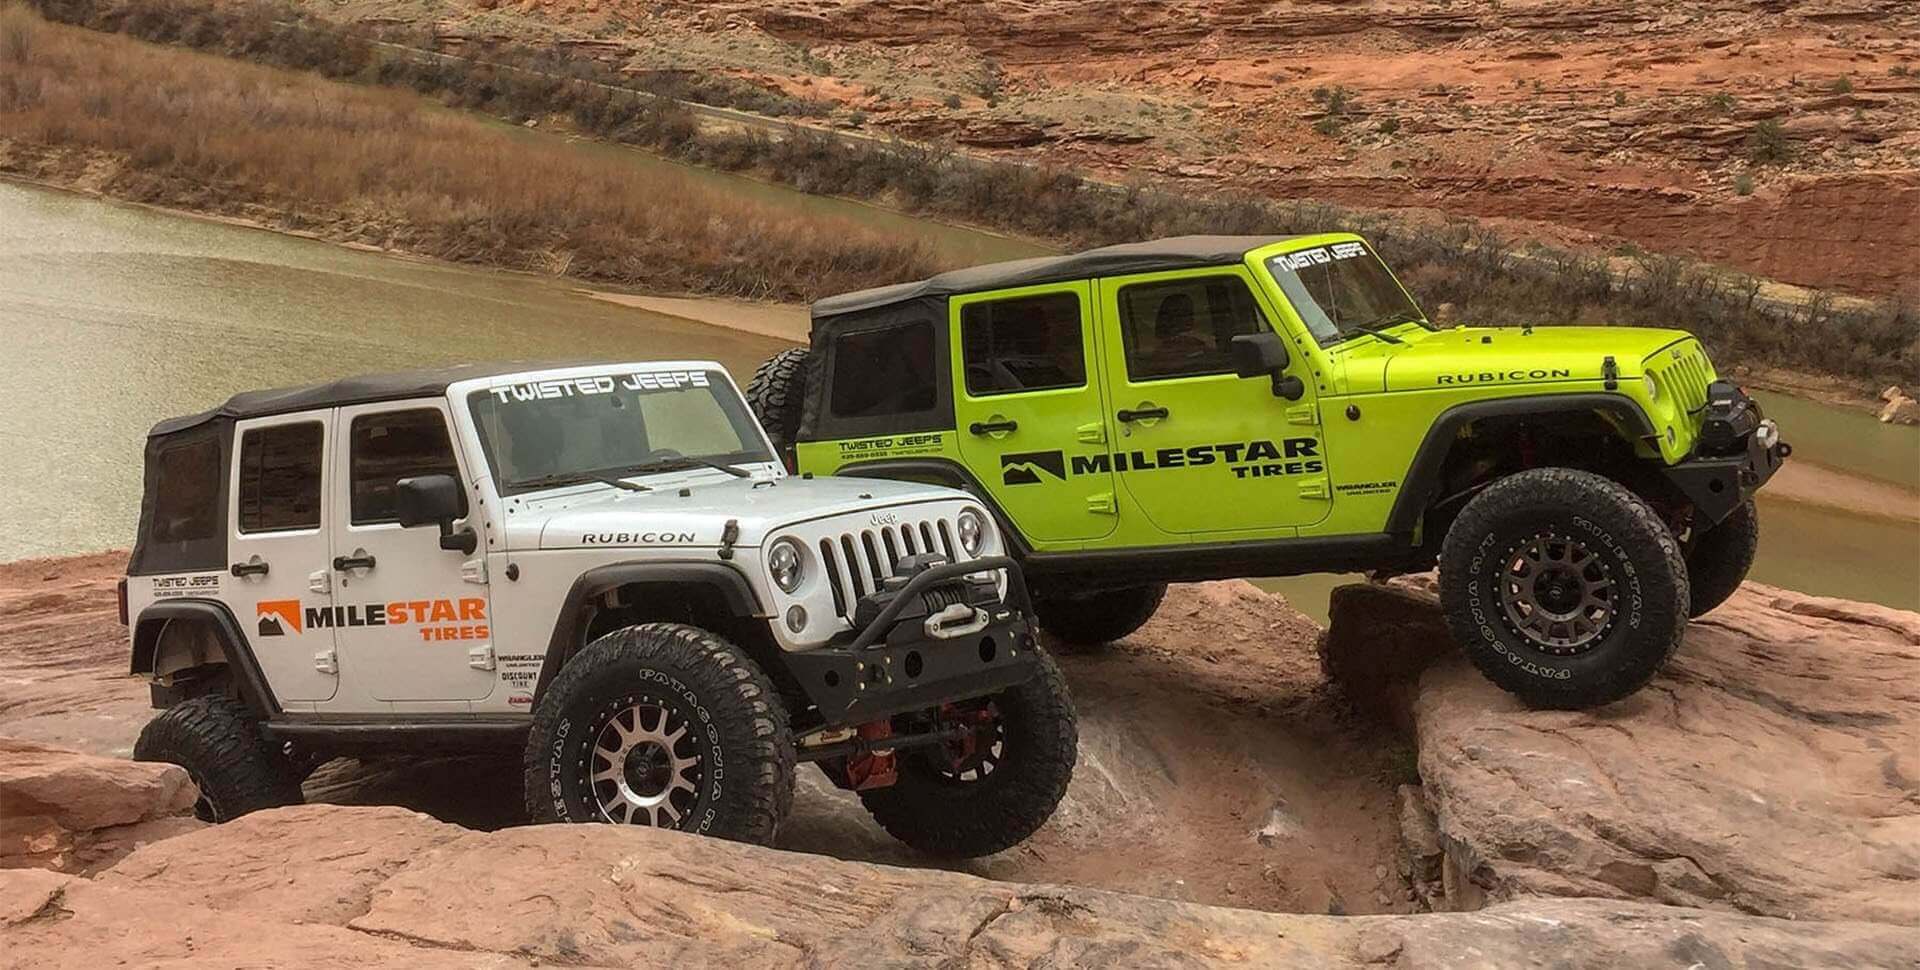 TIRECO’S MILESTAR BRAND PARTNERS WITH TWISTED JEEPS IN MOAB, UTAH